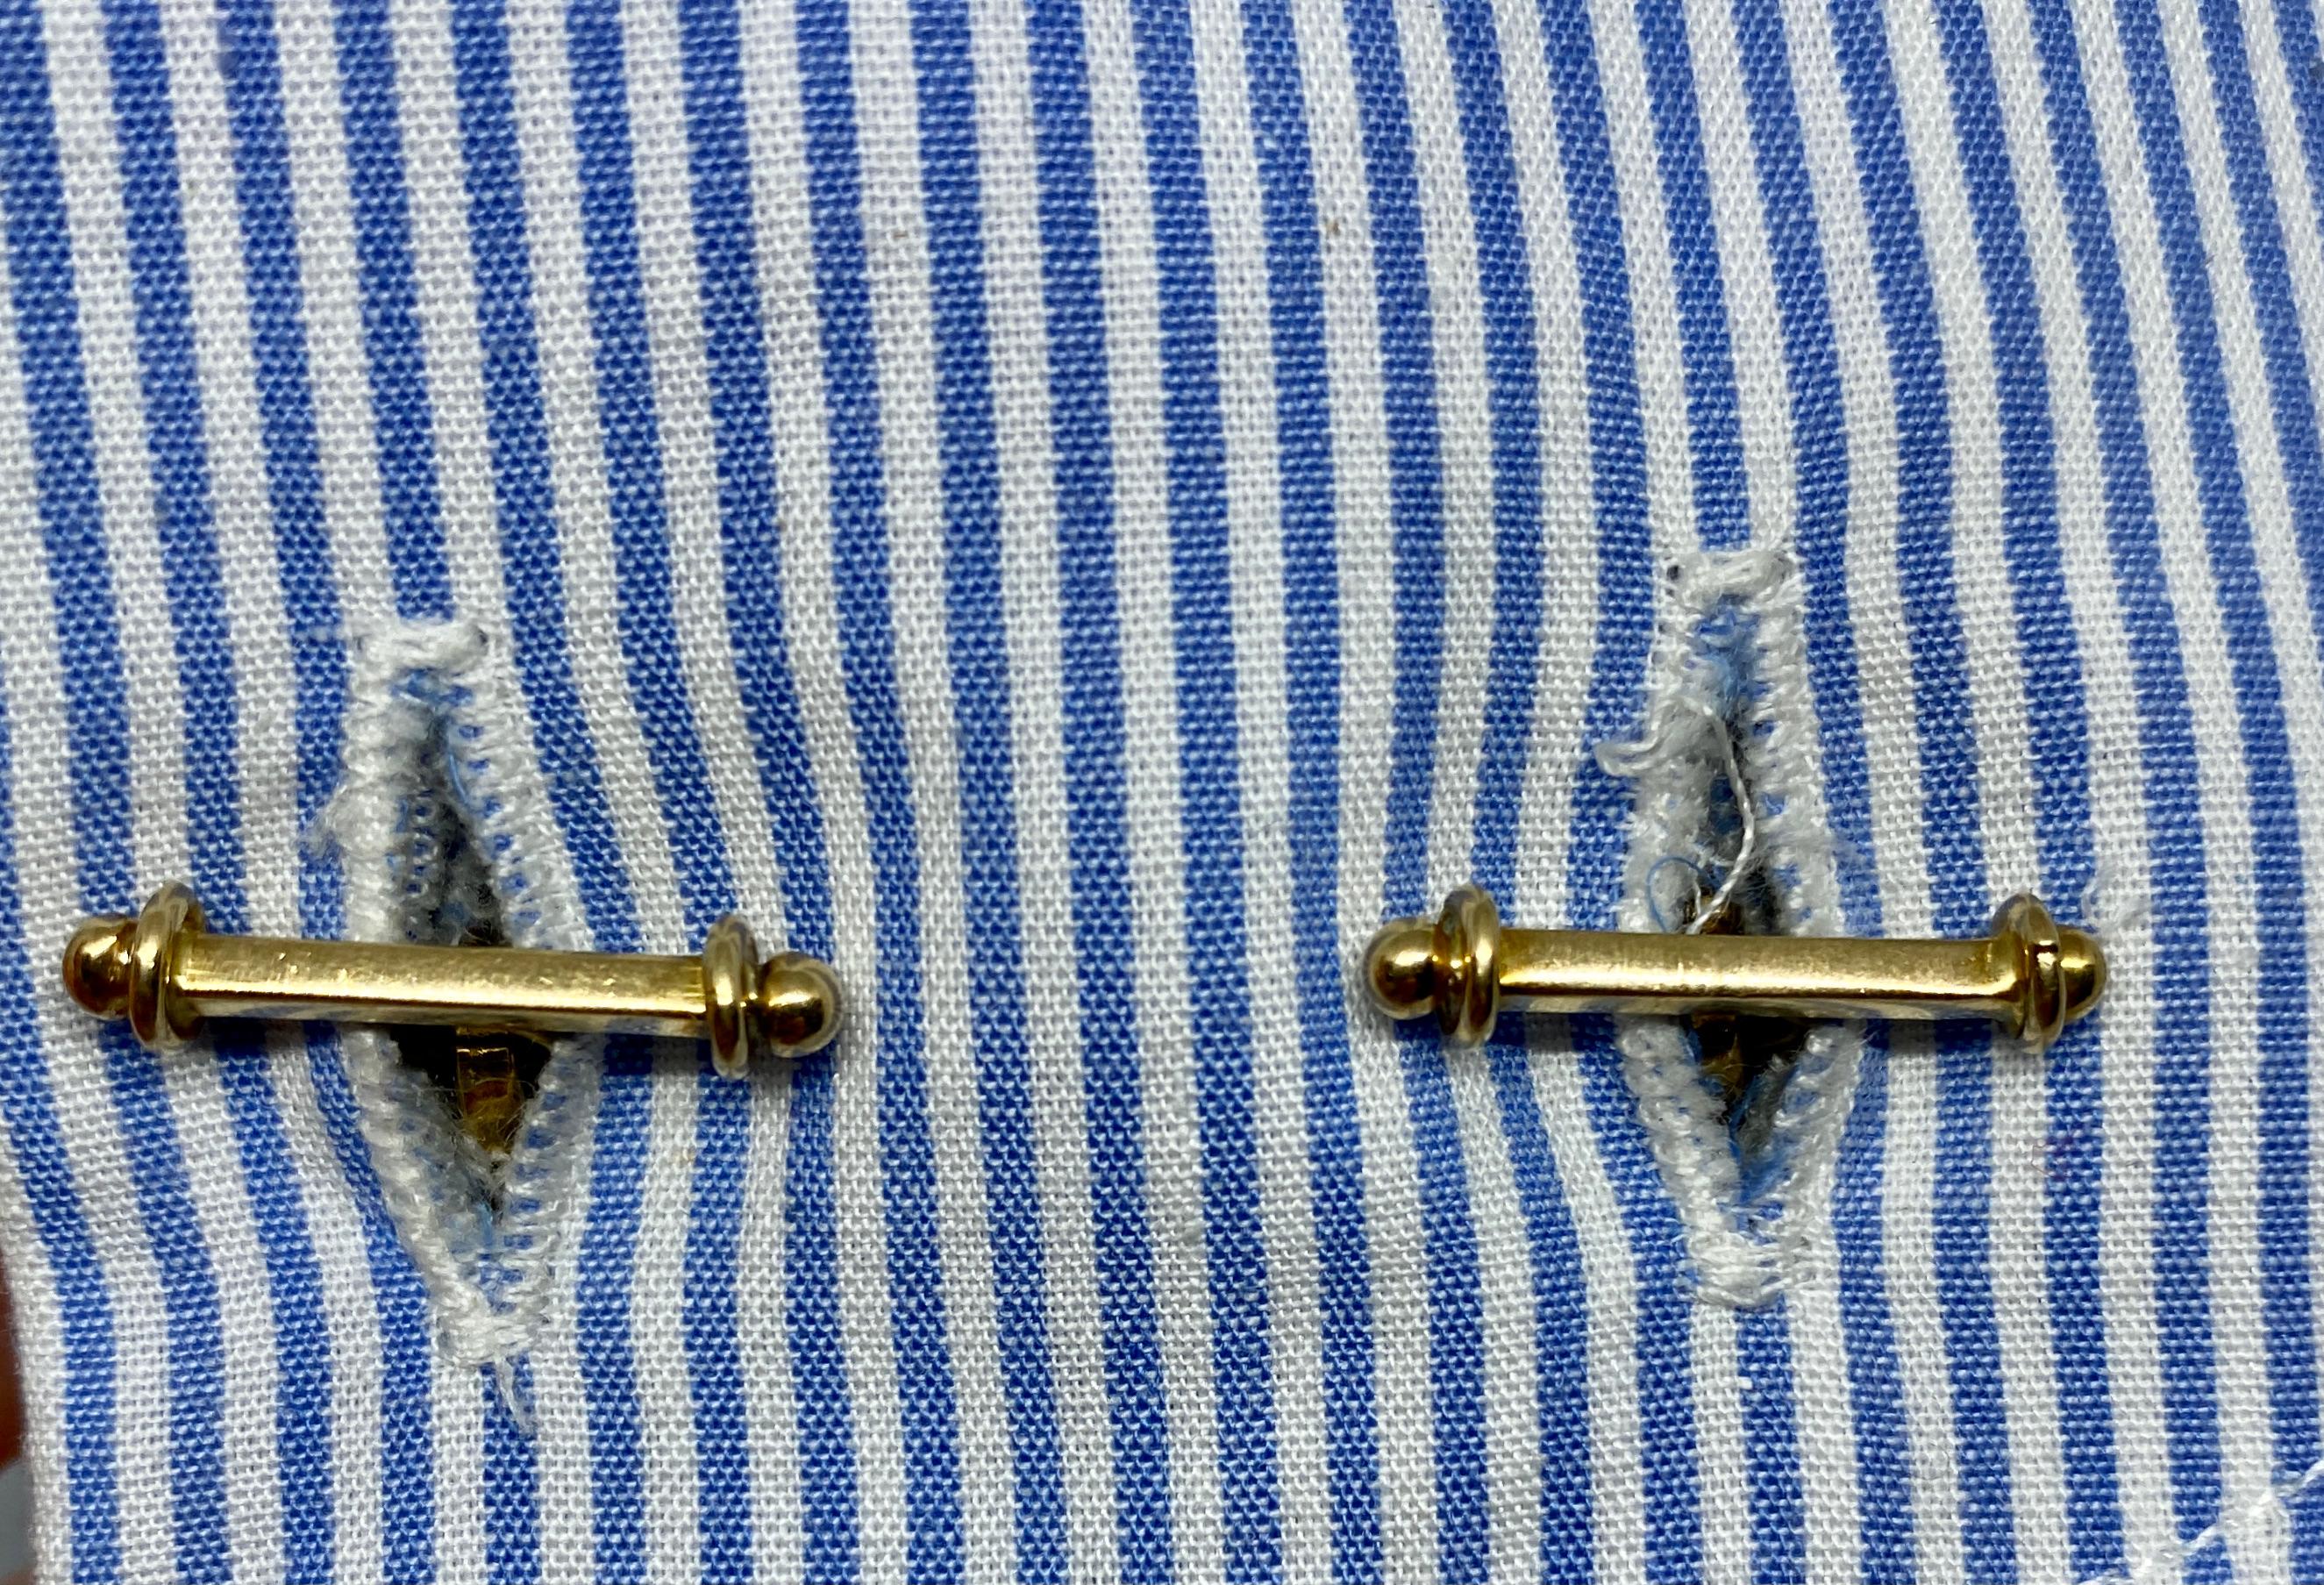 Handmade Cufflinks in 18k Gold with Hammered Silver Details by Ranfagni Firenze For Sale 2